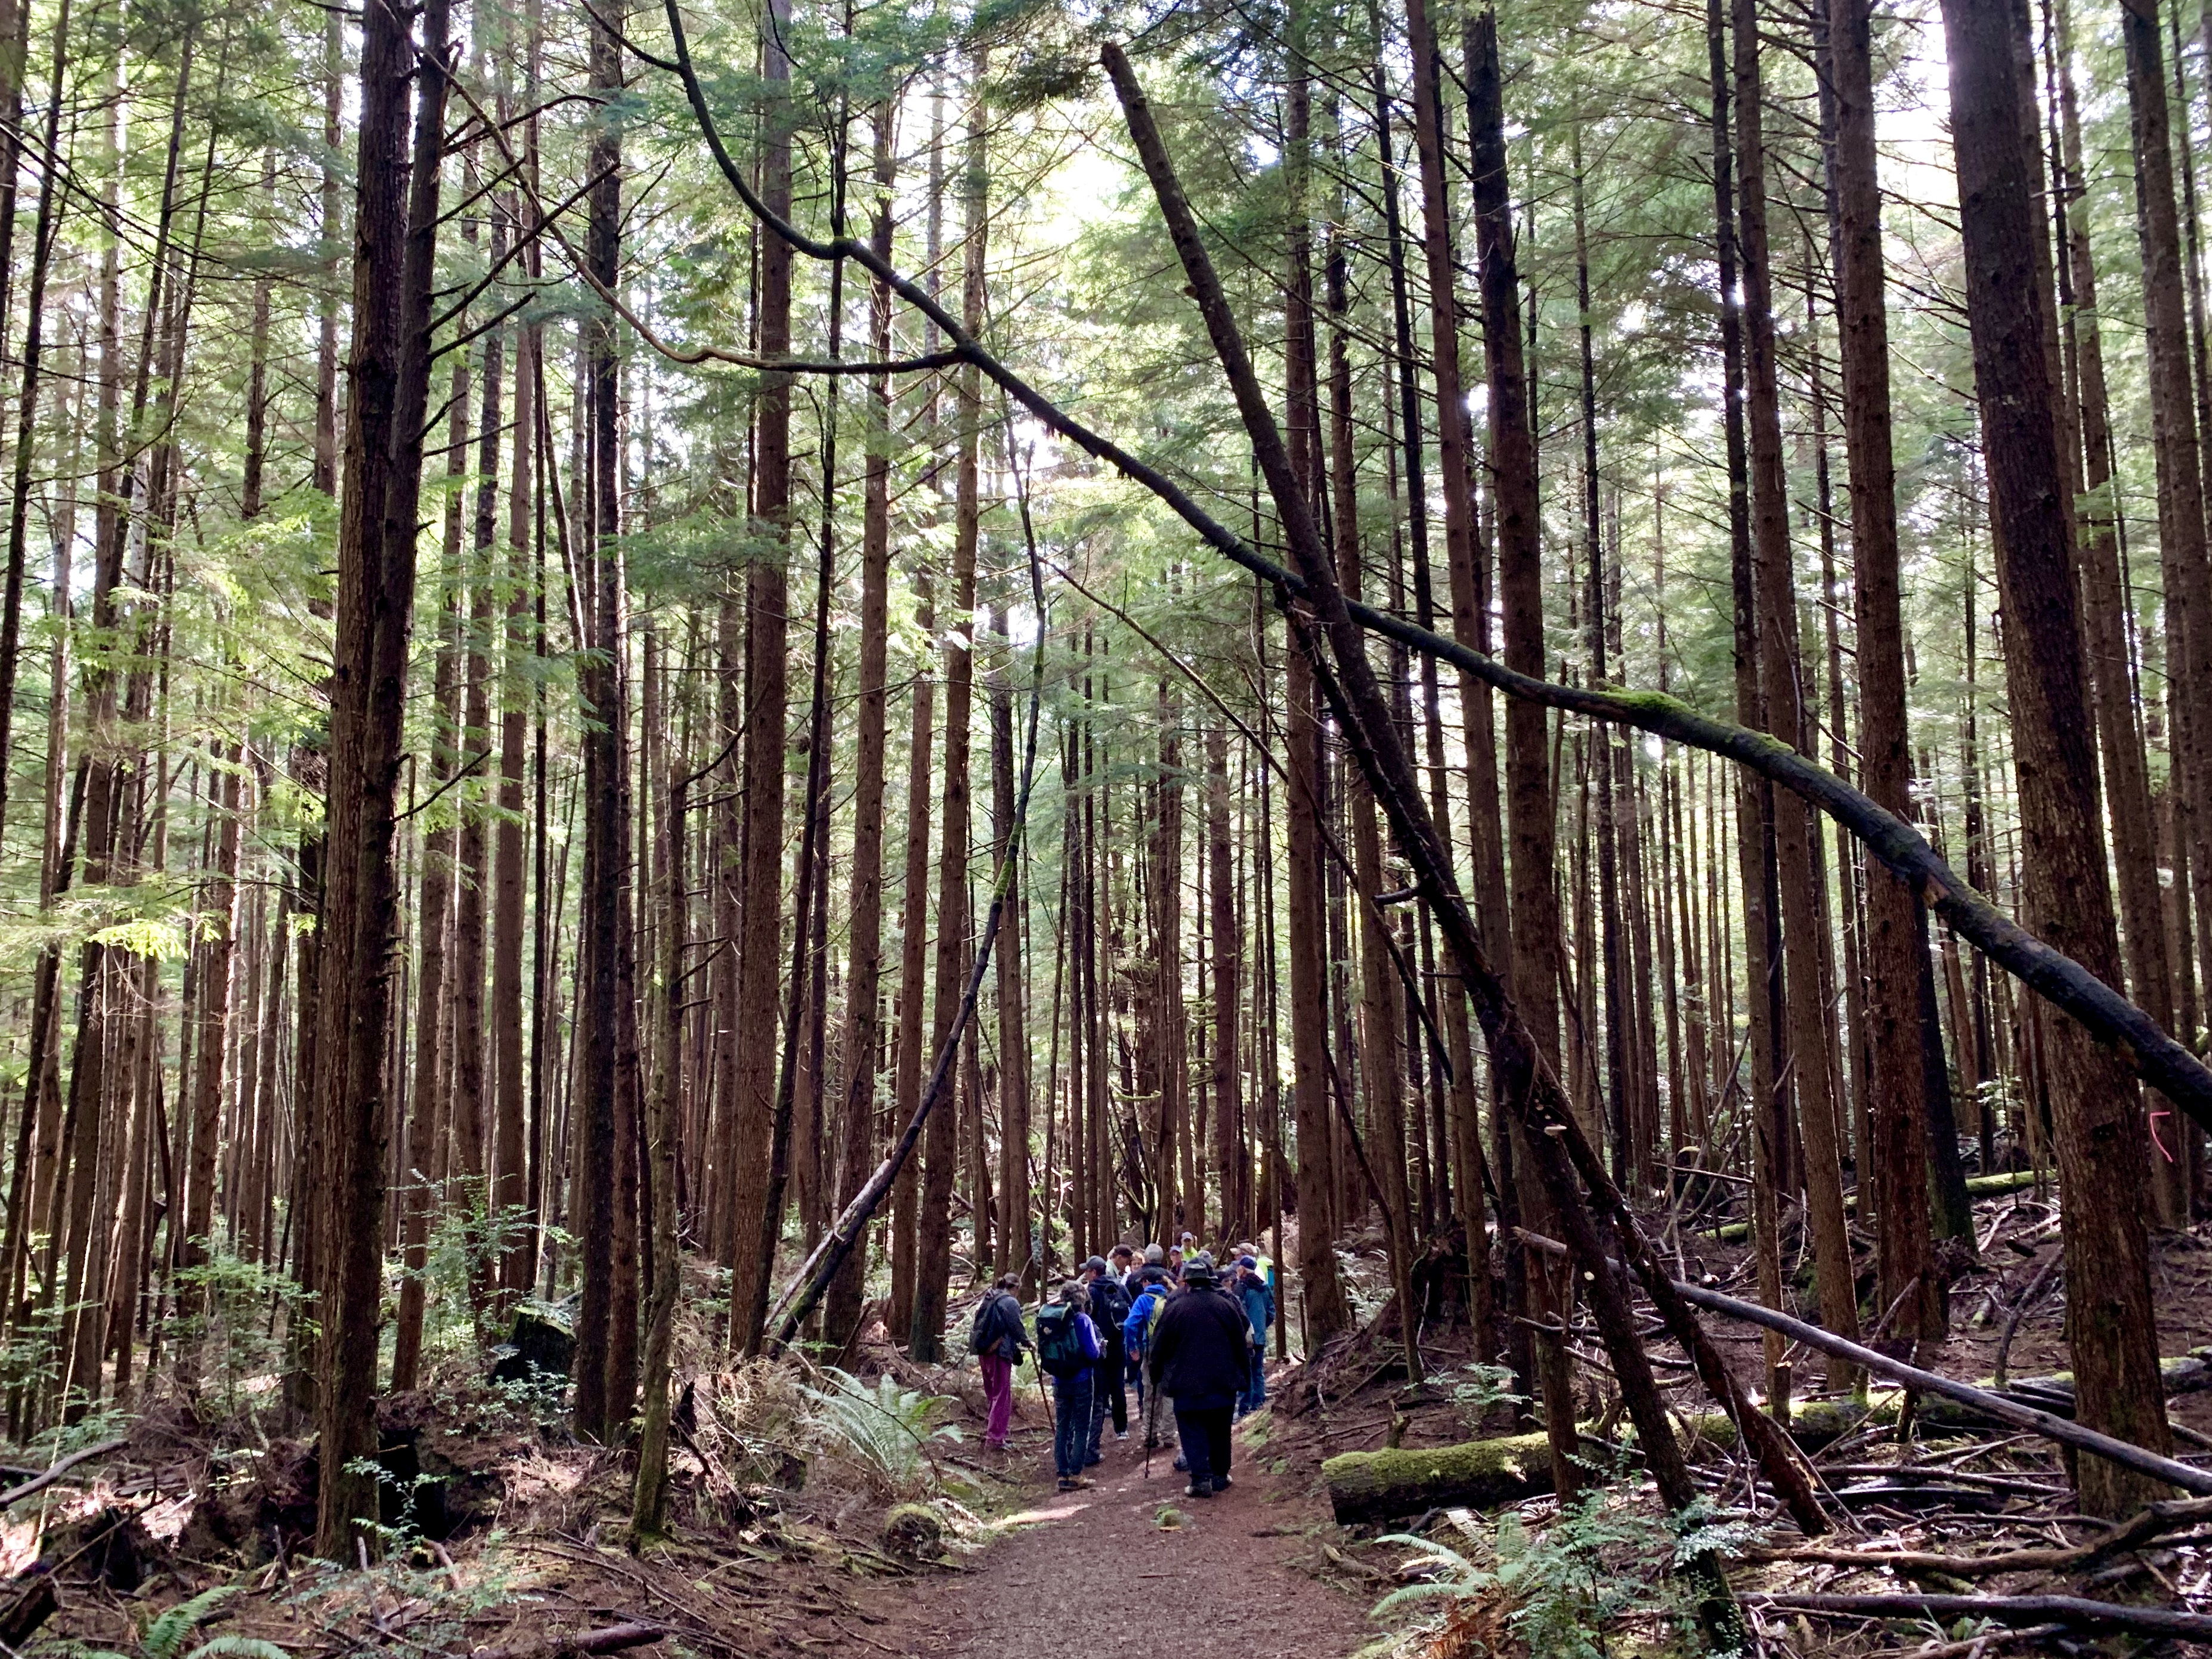 A group of hikers walks through a dense forest on a dirt trail